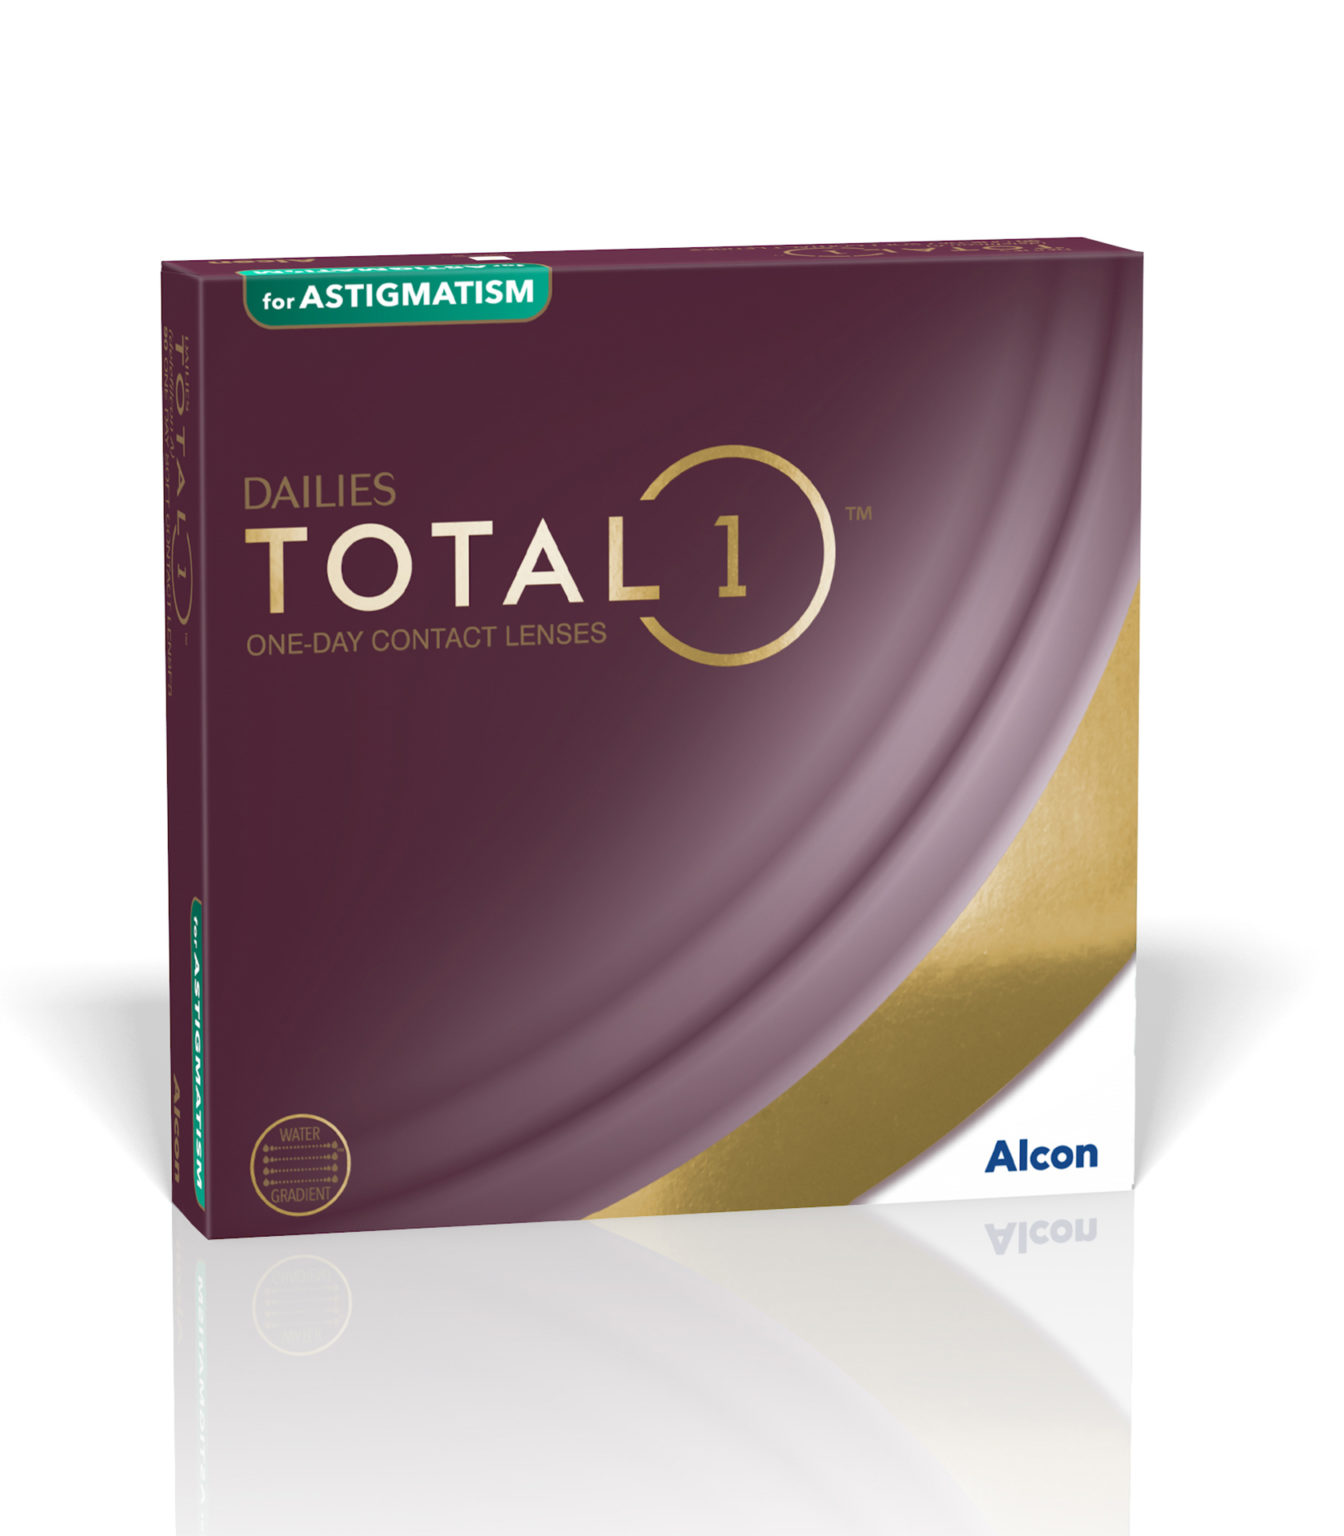 alcon-dailies-total-1-for-astigmatism-90-unidades-framedgang